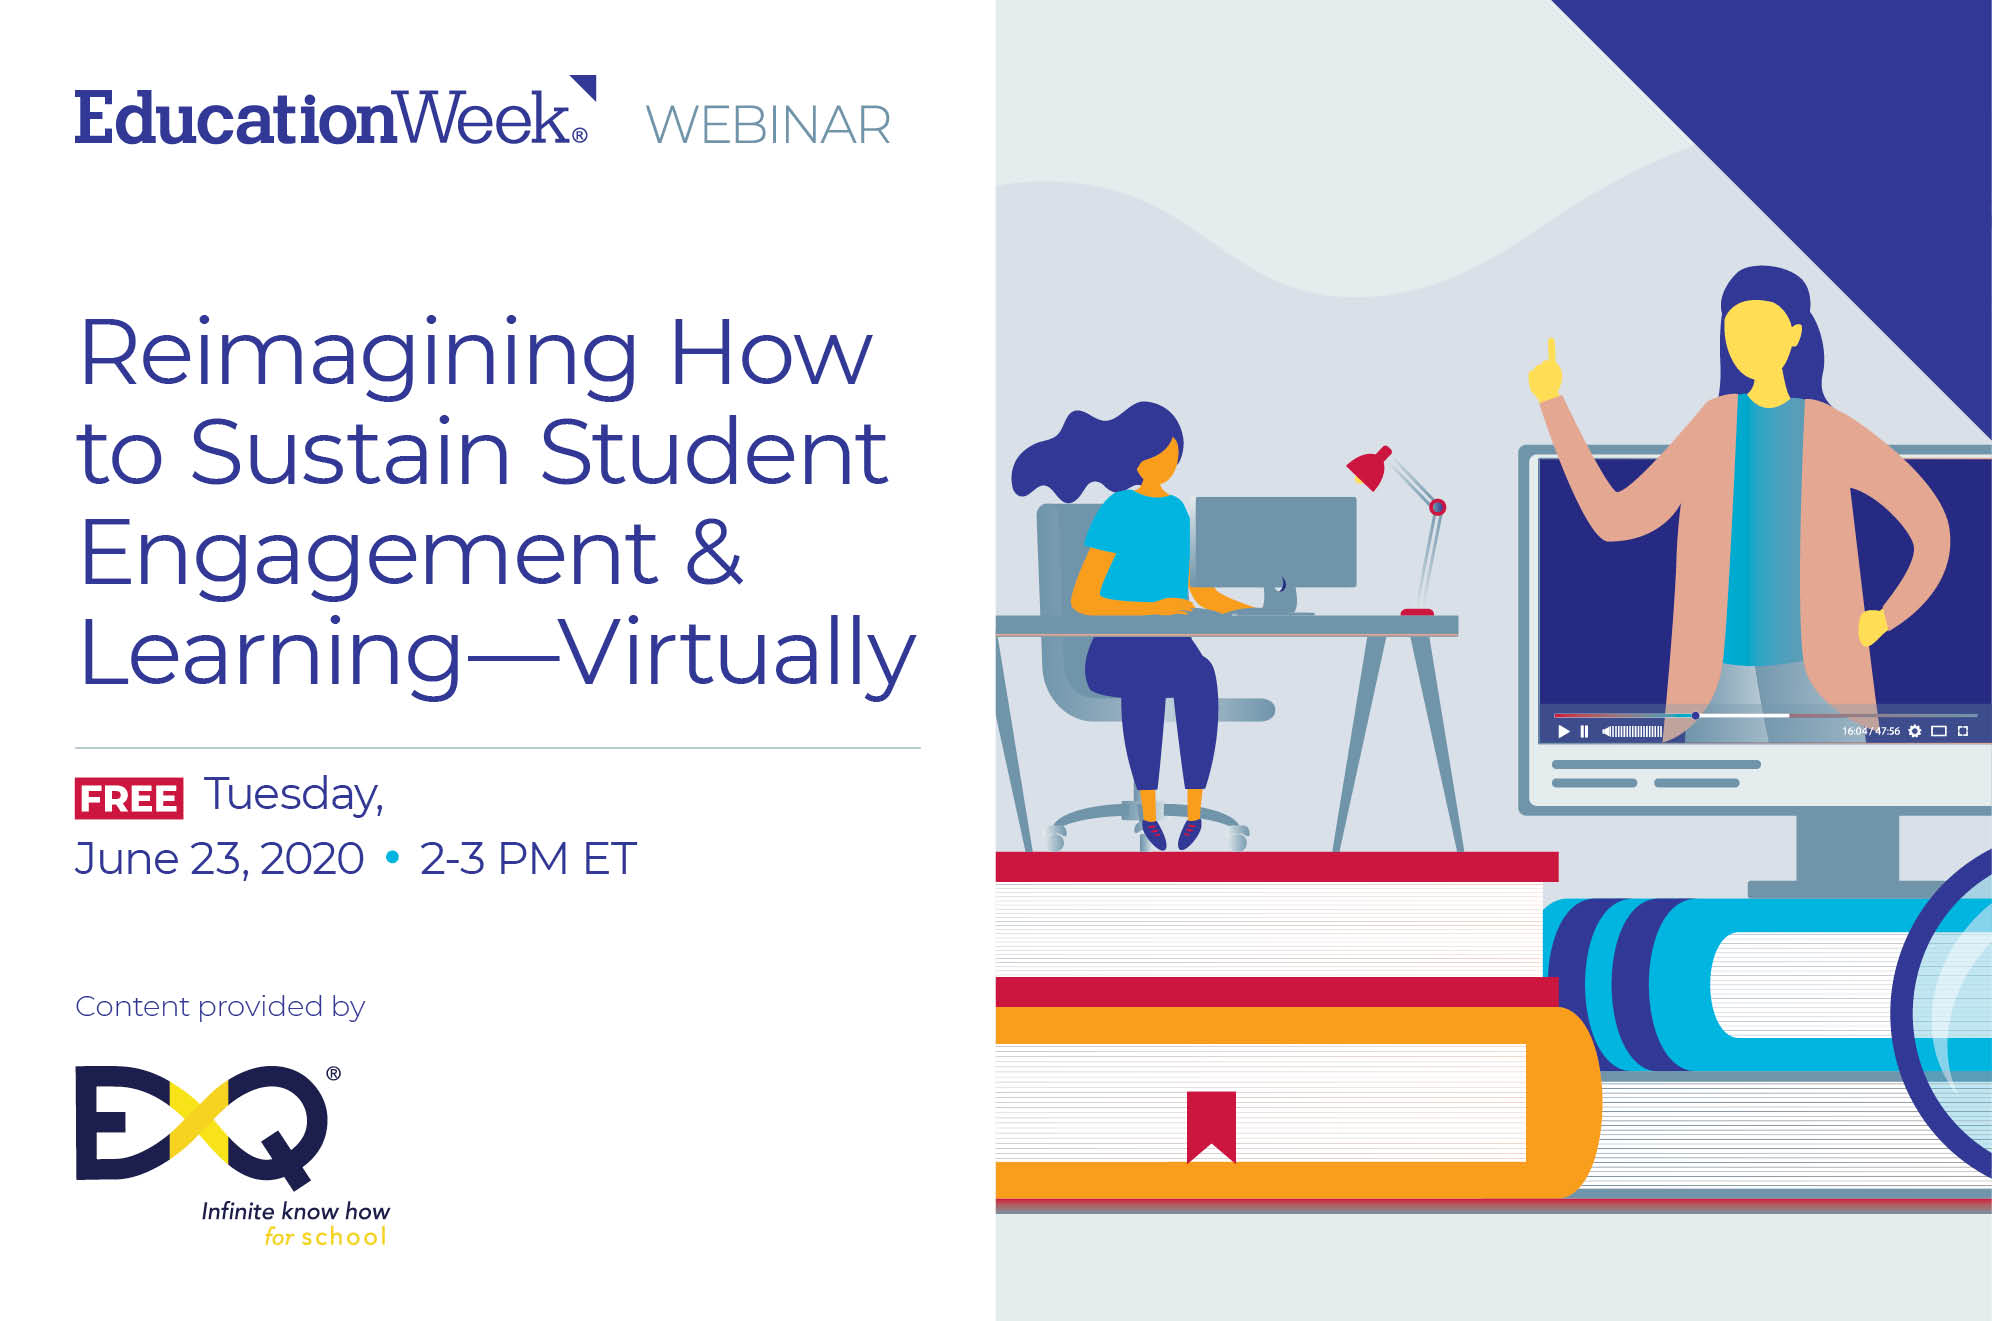 Reimagining How to Sustain Student Engagement & Learning—Virtually